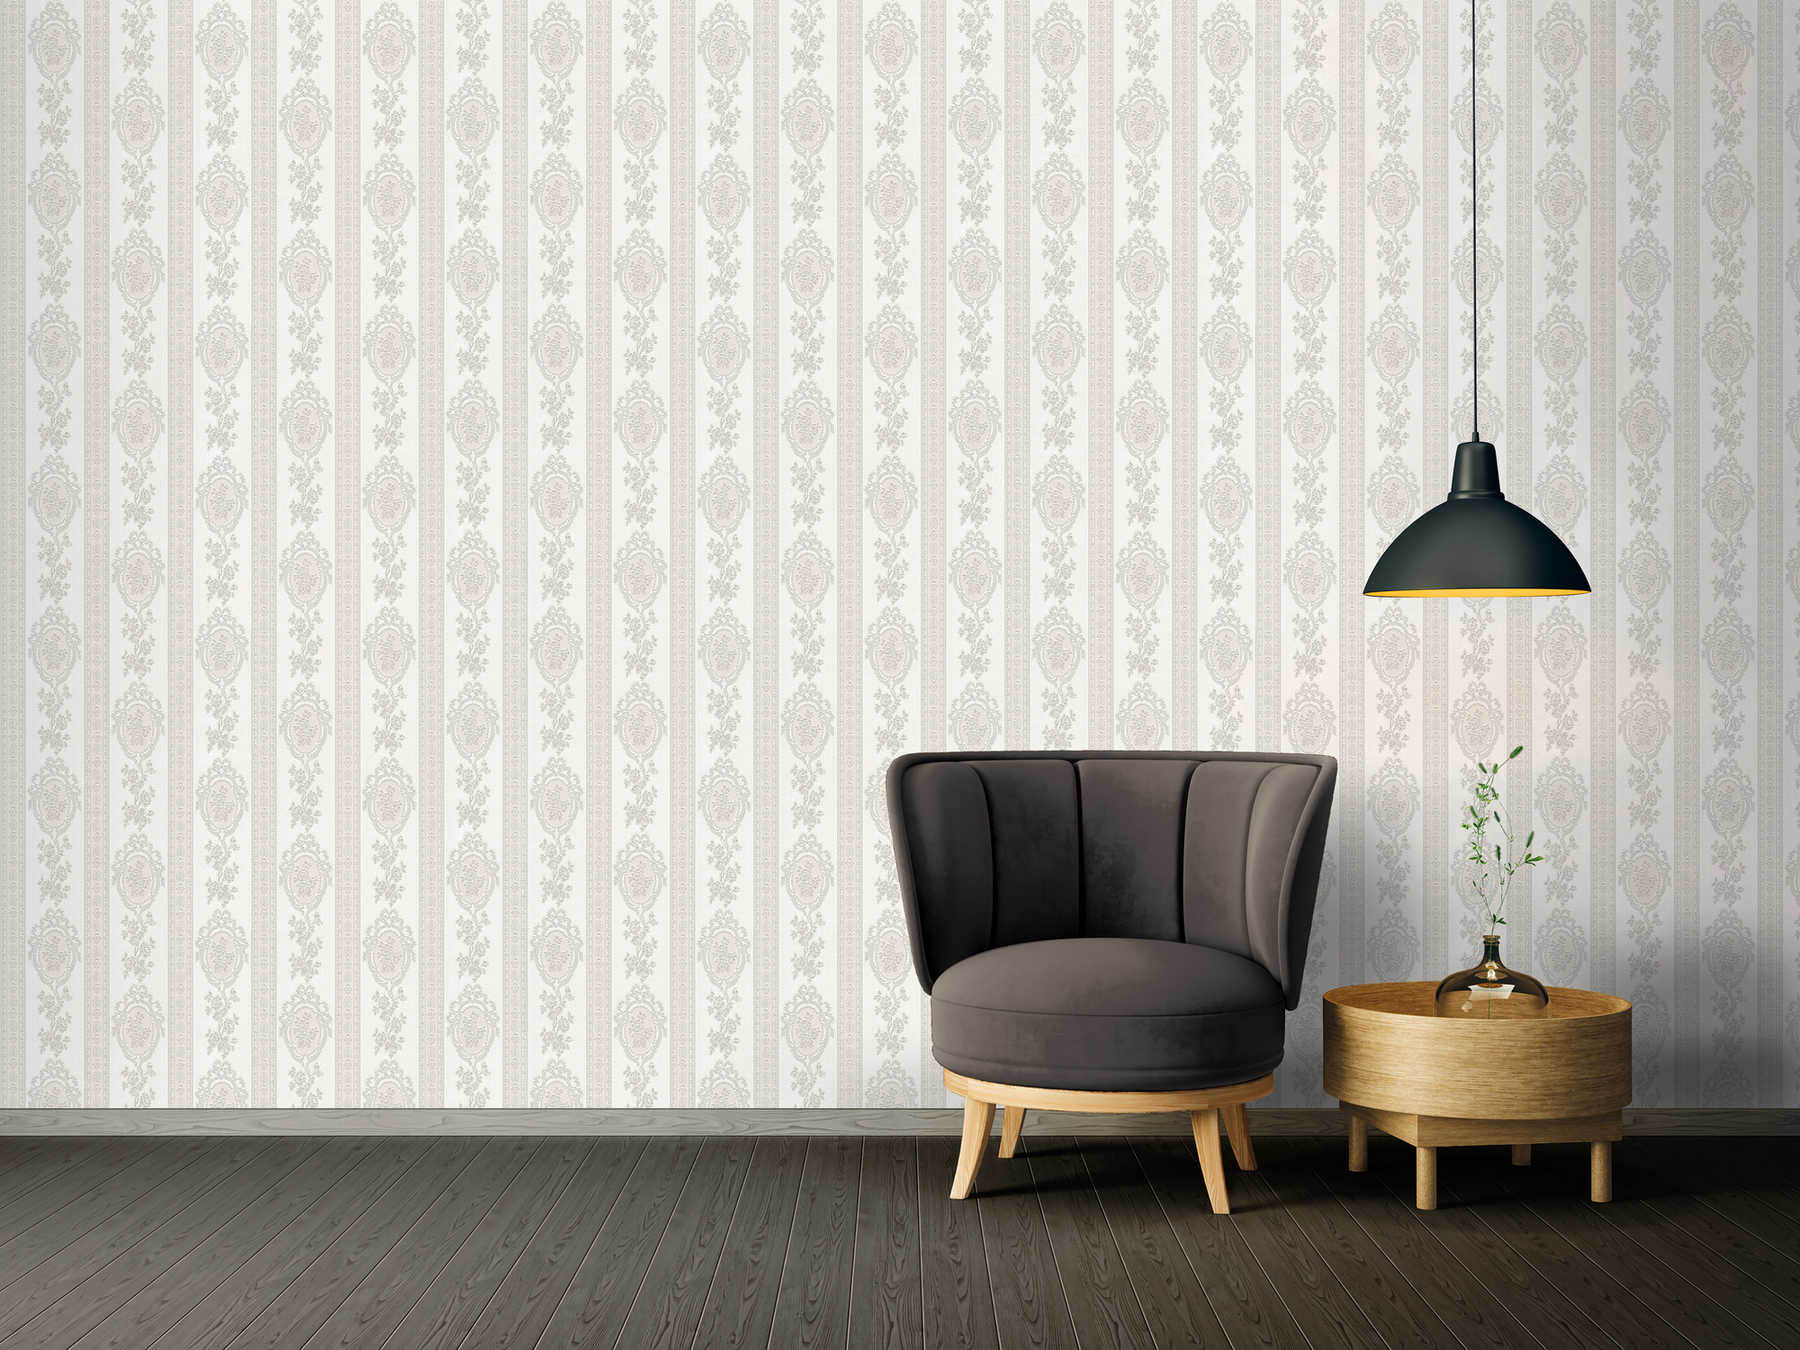             Ornamental wallpaper floral elements, stripes and flowers - grey, white, silver
        